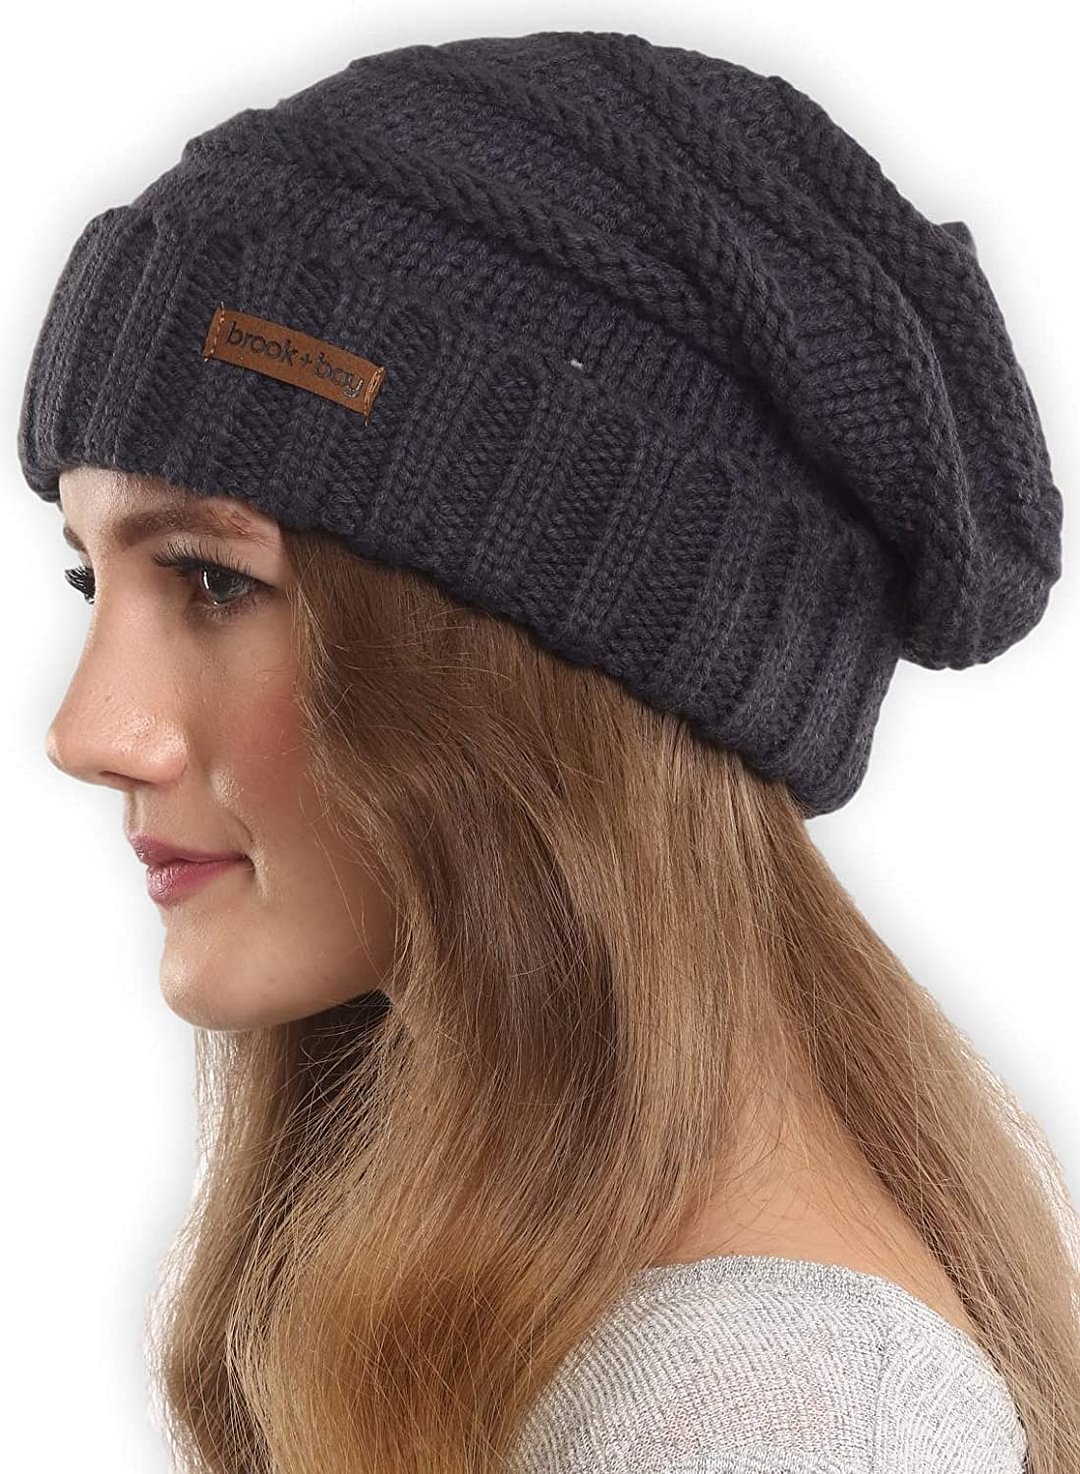 Warm & Cute Oversized Slouch Winter Hats - Thick, Chunky & Soft Stretch Knitted Caps for Cold Weather